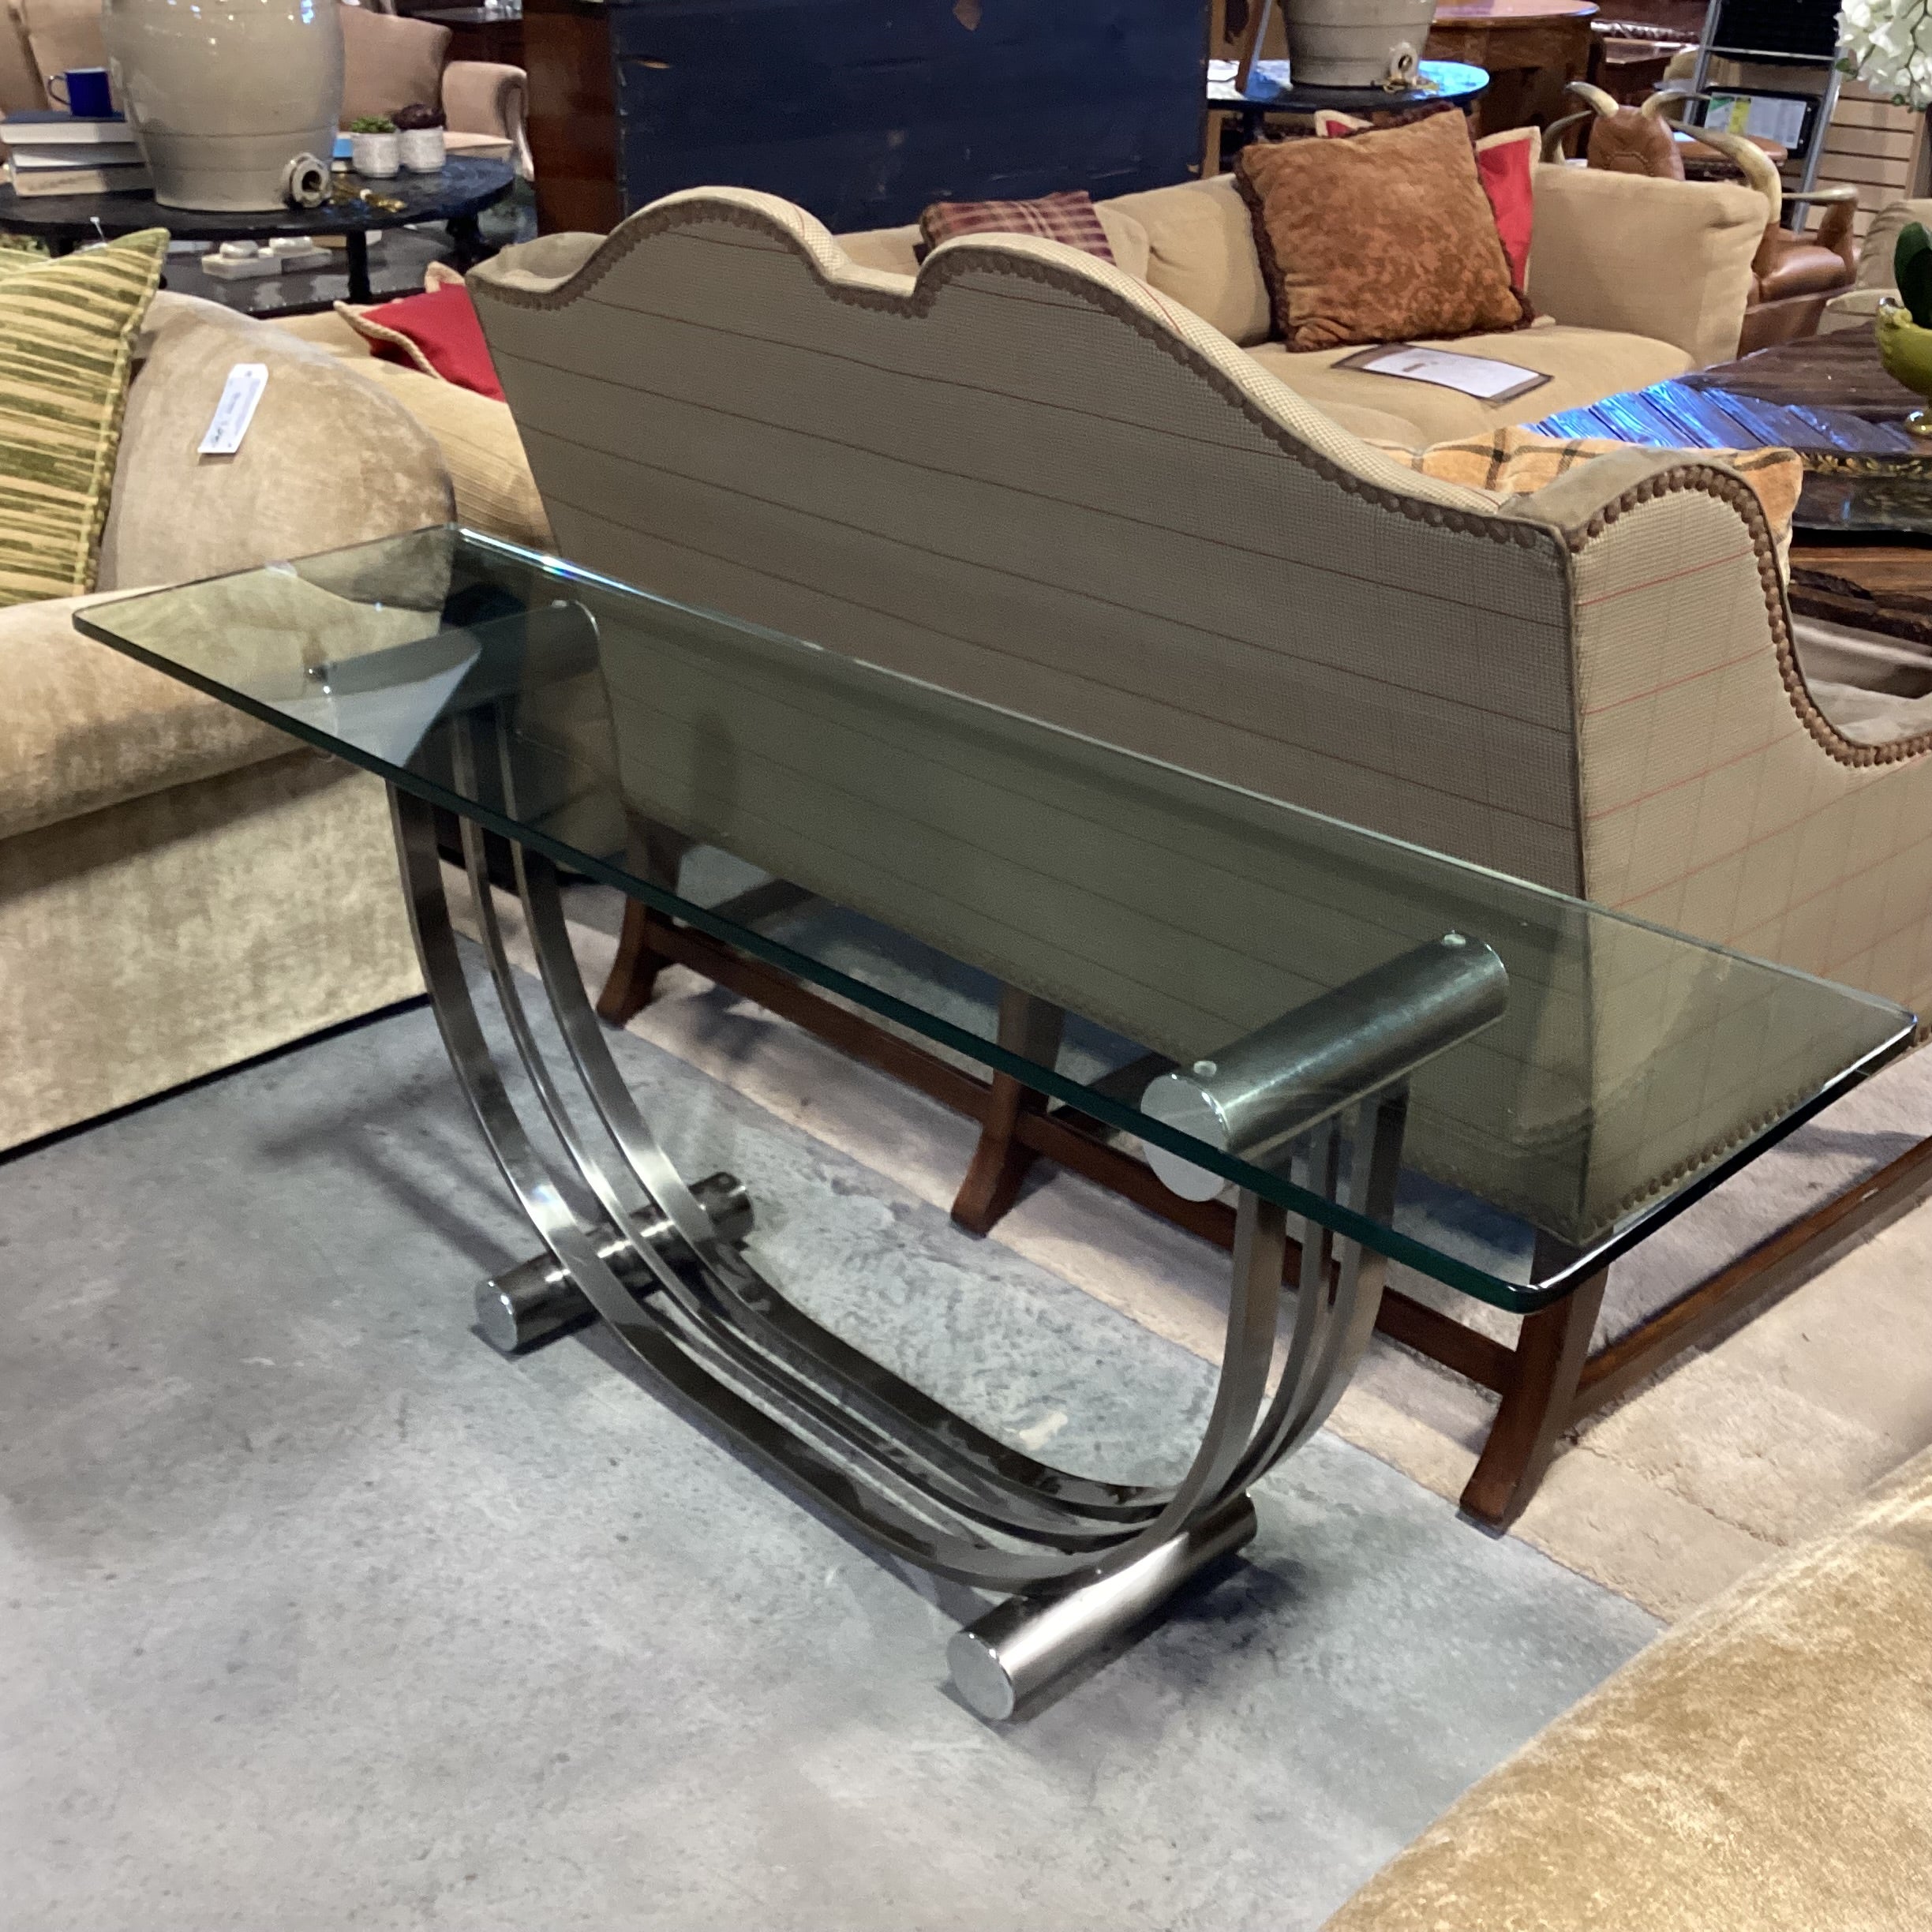 Arched Stainless with Glass Top Sofa Table 68"x 18"x 27.5"